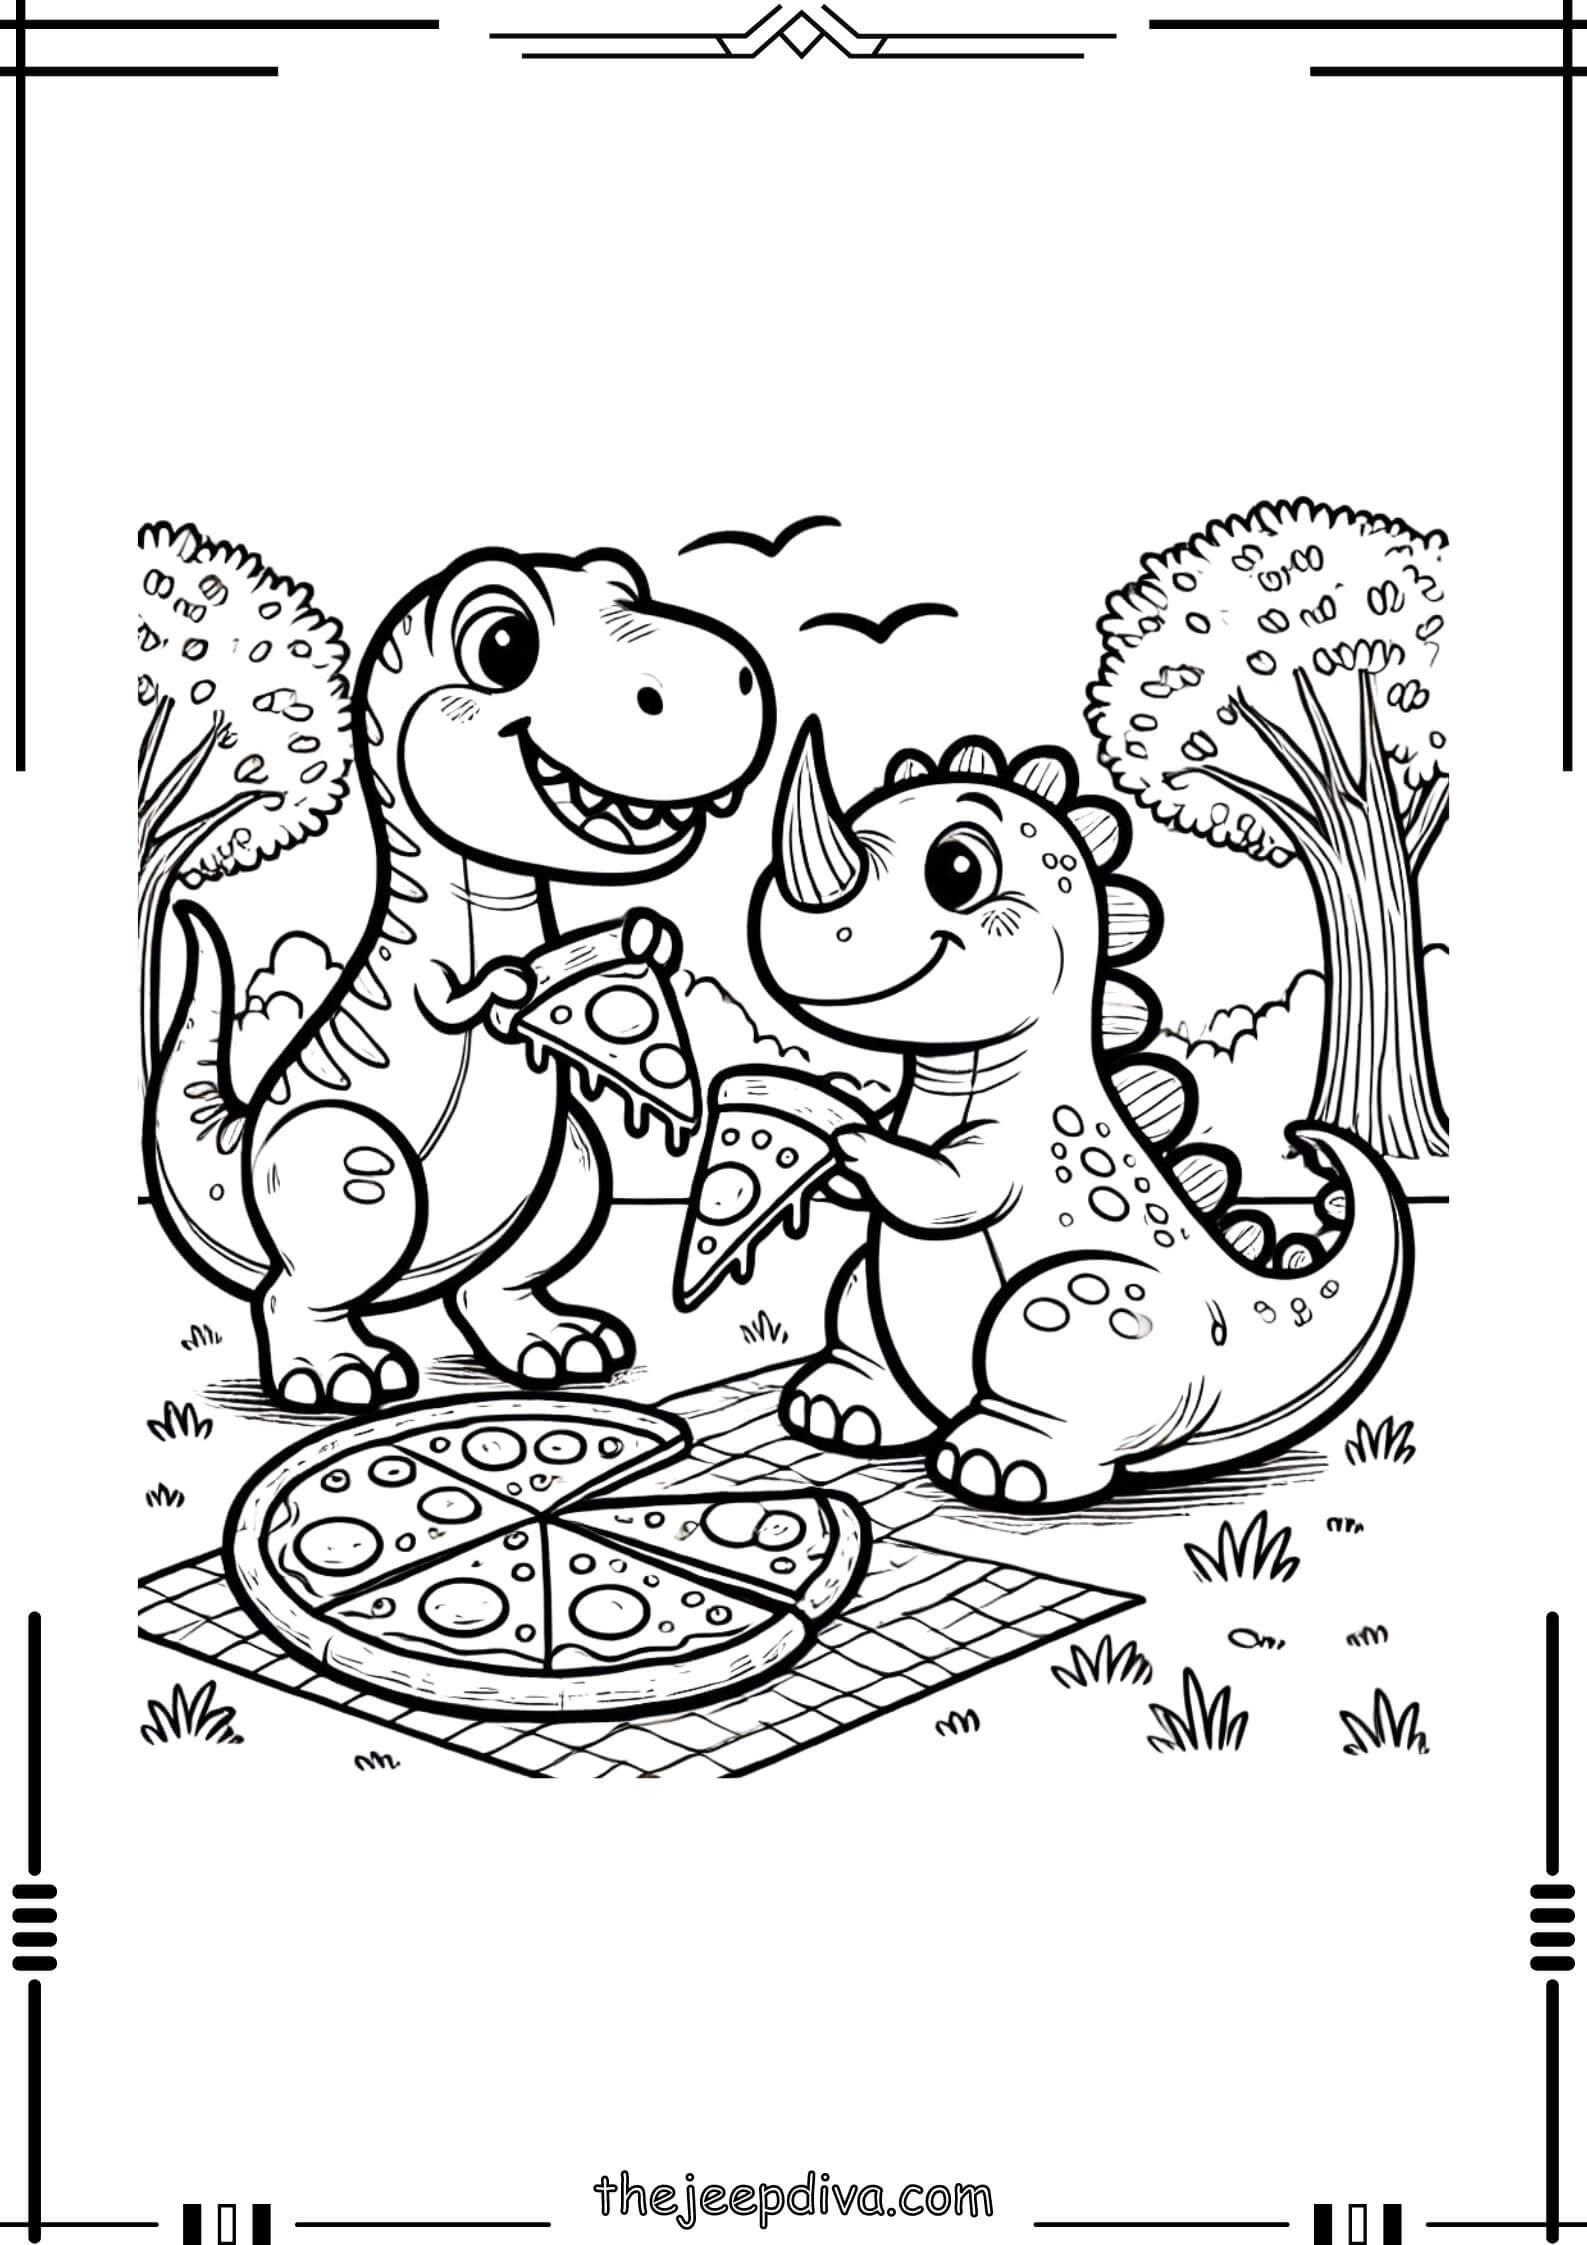 Dinosaur-Colouring-Pages-Hard-19